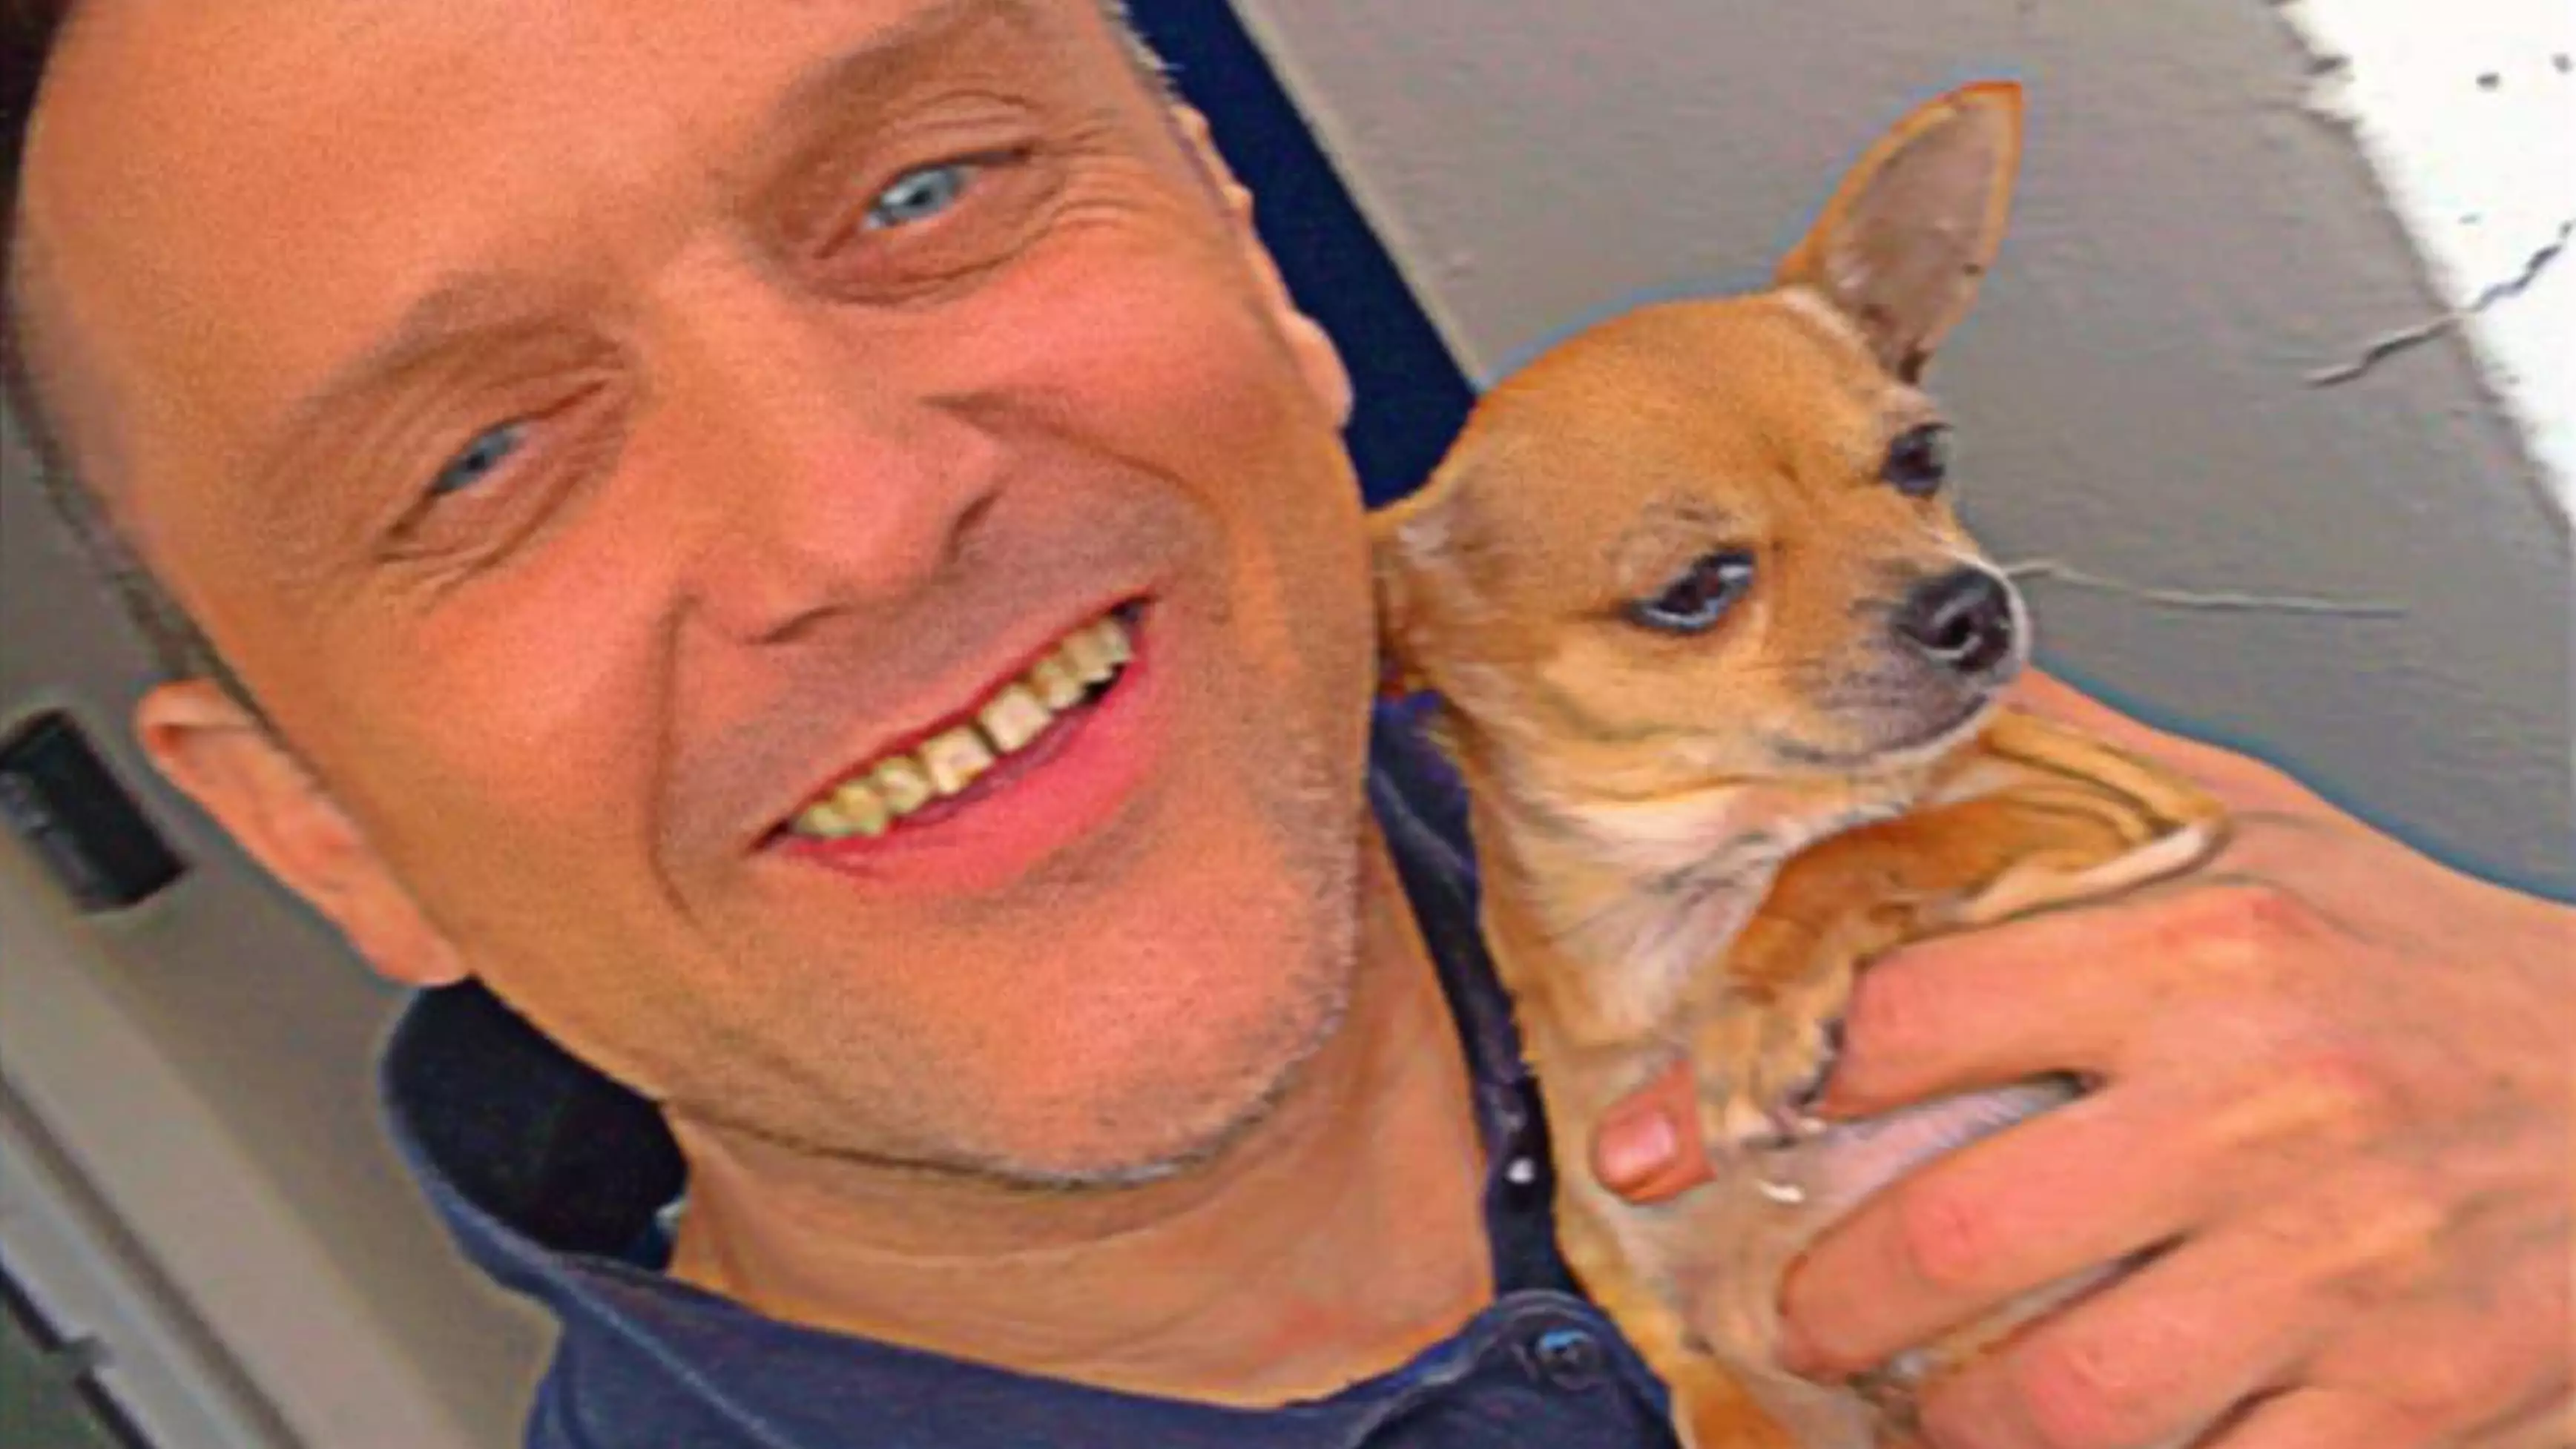 Man's Dog Selfie Goes Terribly Wrong In 'Rude' Pic